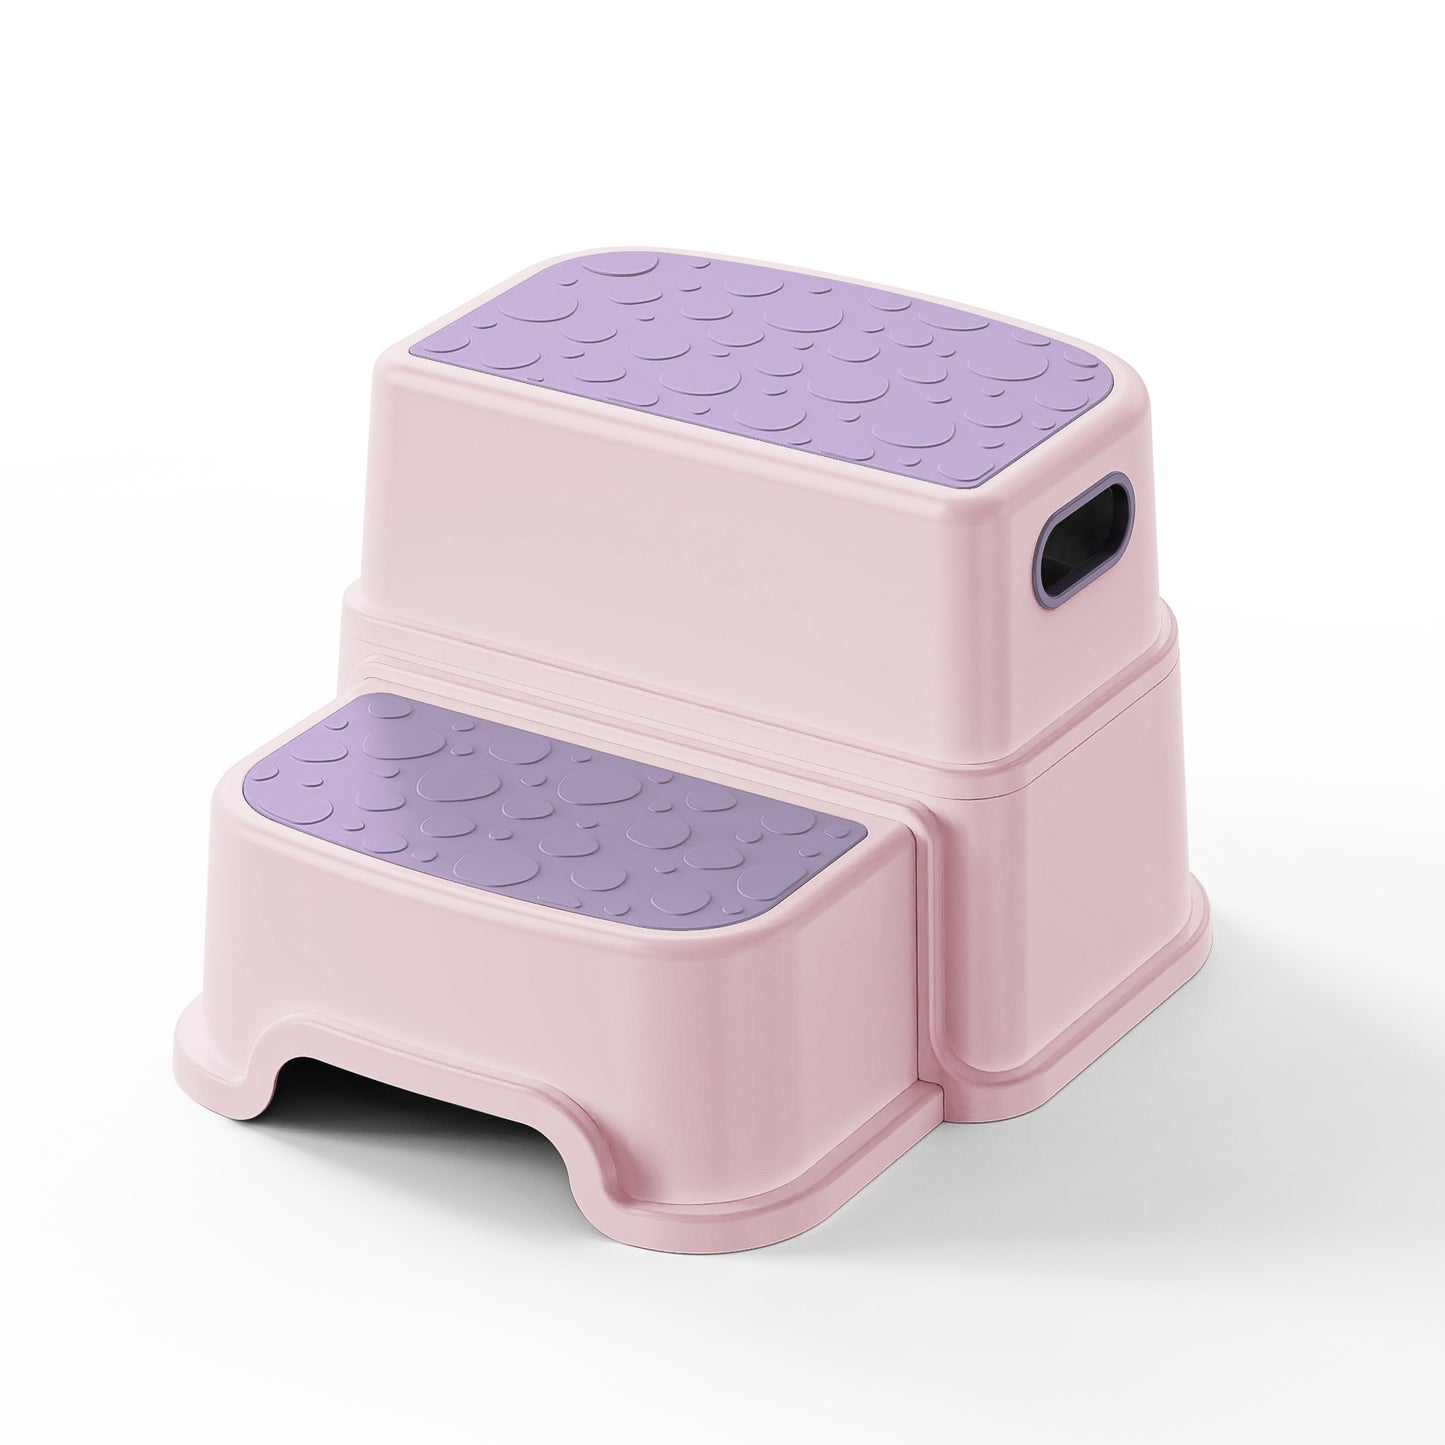 3 in 1 Step Stool for Kids - Toddler Sink Step Up Stool for Kitchen - Bathroom Safety Bottom as Potty Training Stool -Double Step Stool for Kitchen,Bathroom - Eco-Friendly